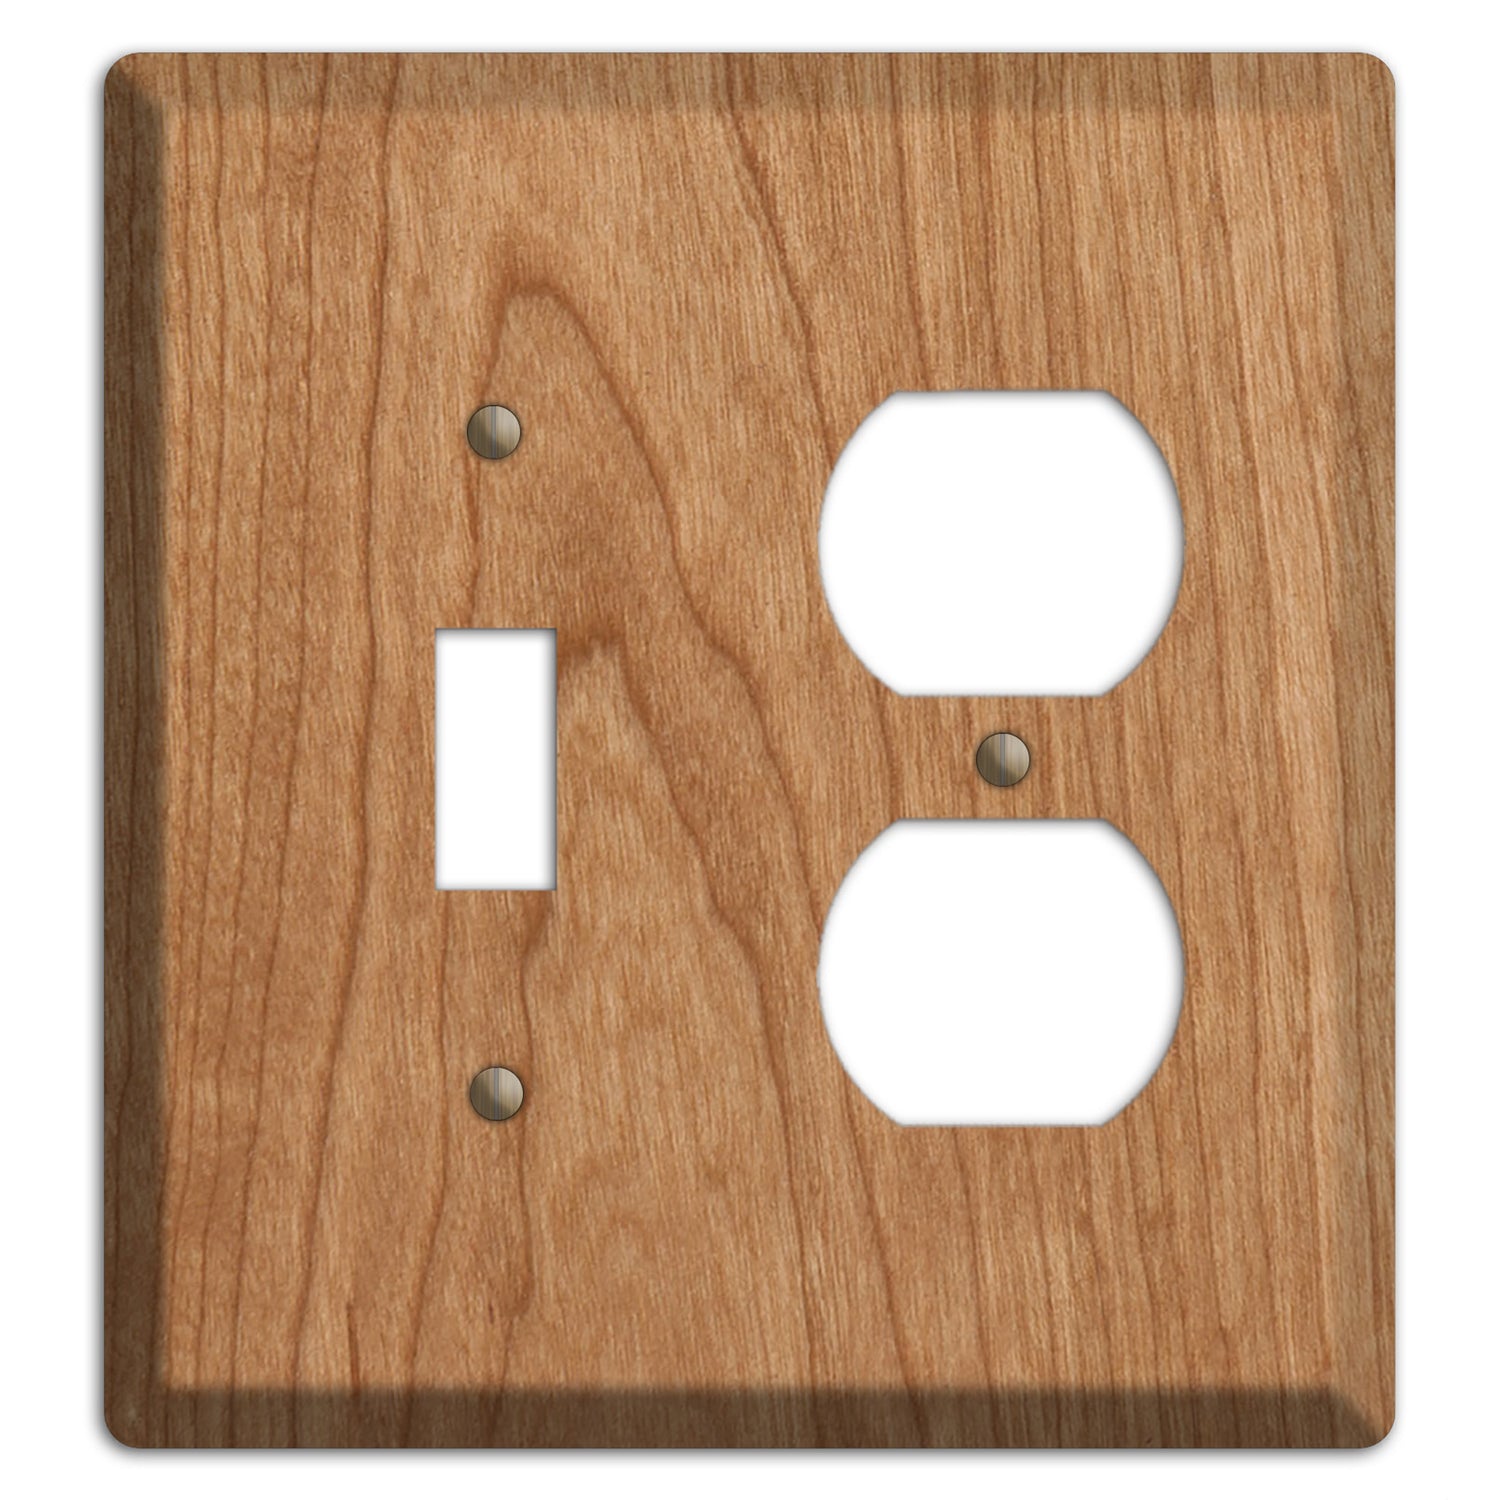 Unfinished Cherry Wood Toggle / Duplex Outlet Cover Plate –